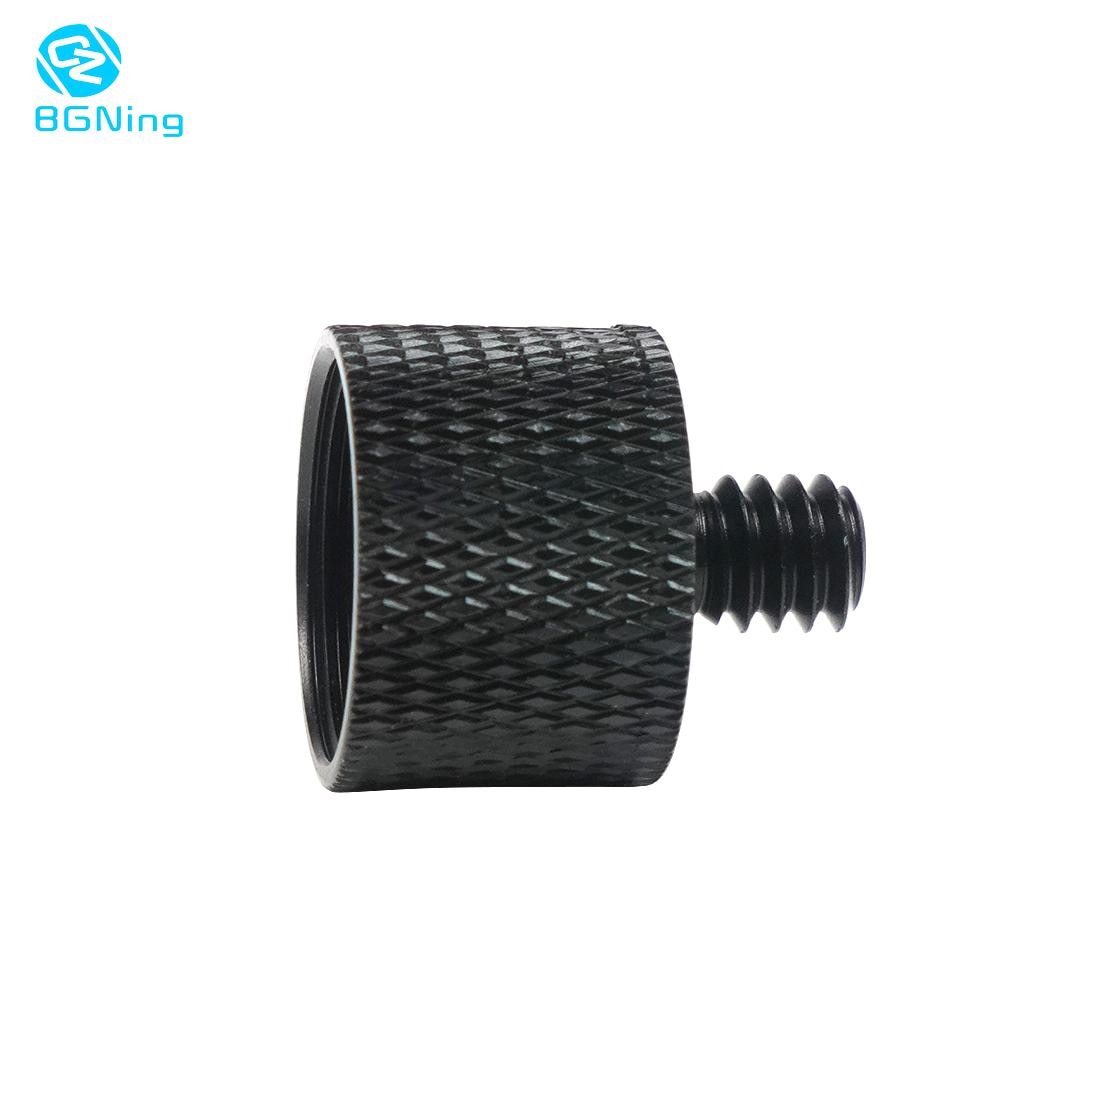 BGNing 1/4  to 3/8  5/8  to 3/8  Inch Thread Screw Male to Female M4 M8 Mount Adapter Screw DSLR Camera Photography Accessories